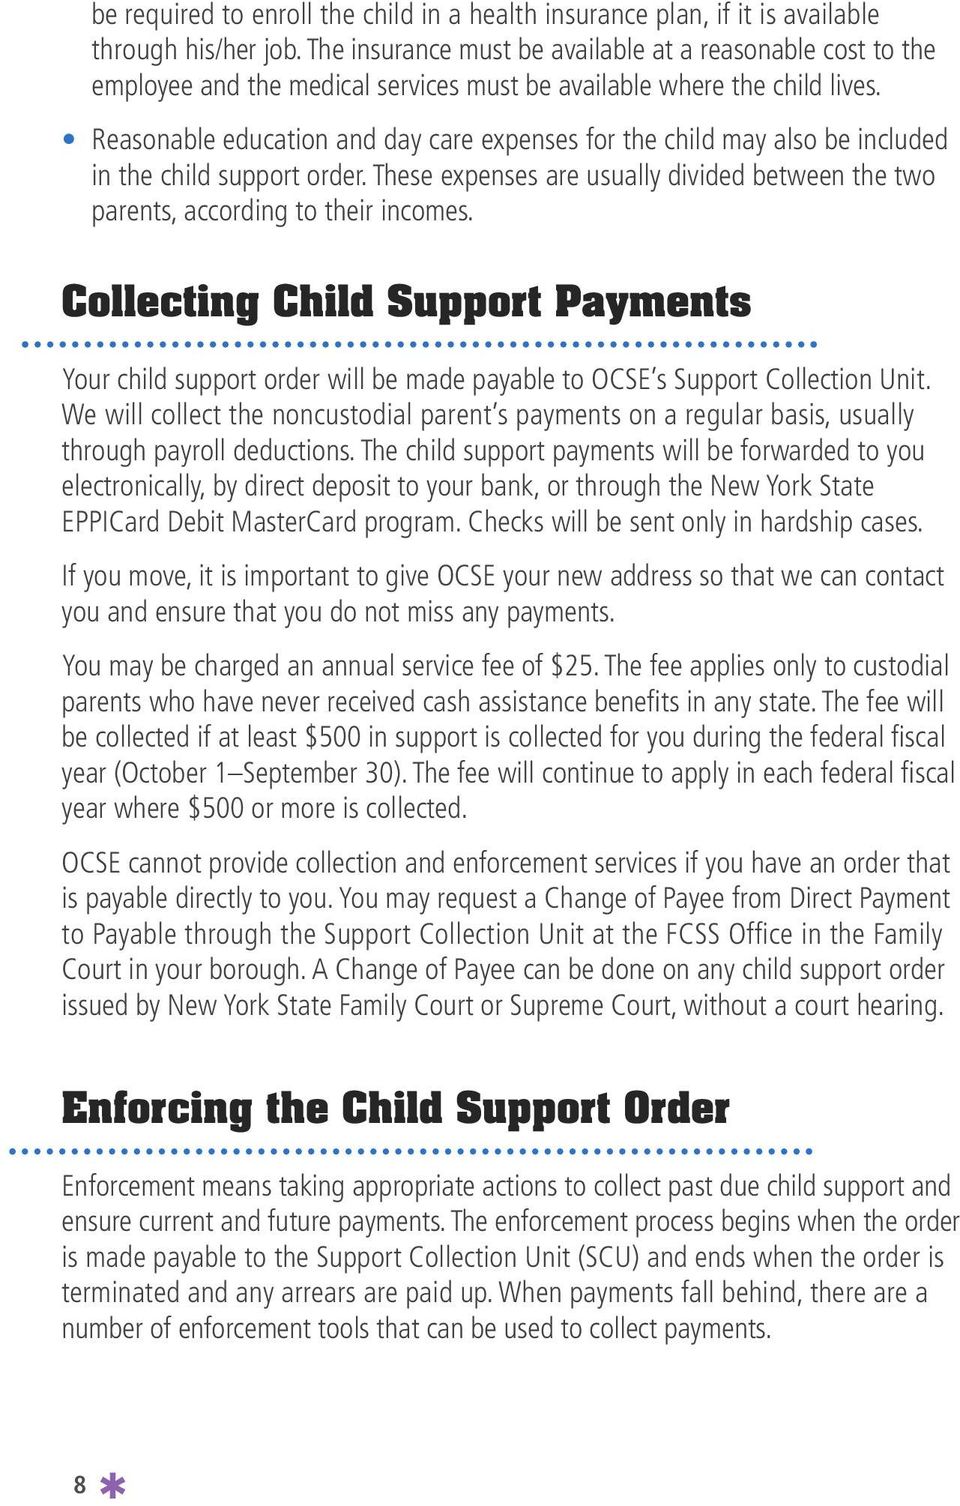 Reasonable education and day care expenses for the child may also be included in the child support order. These expenses are usually divided between the two parents, according to their incomes.